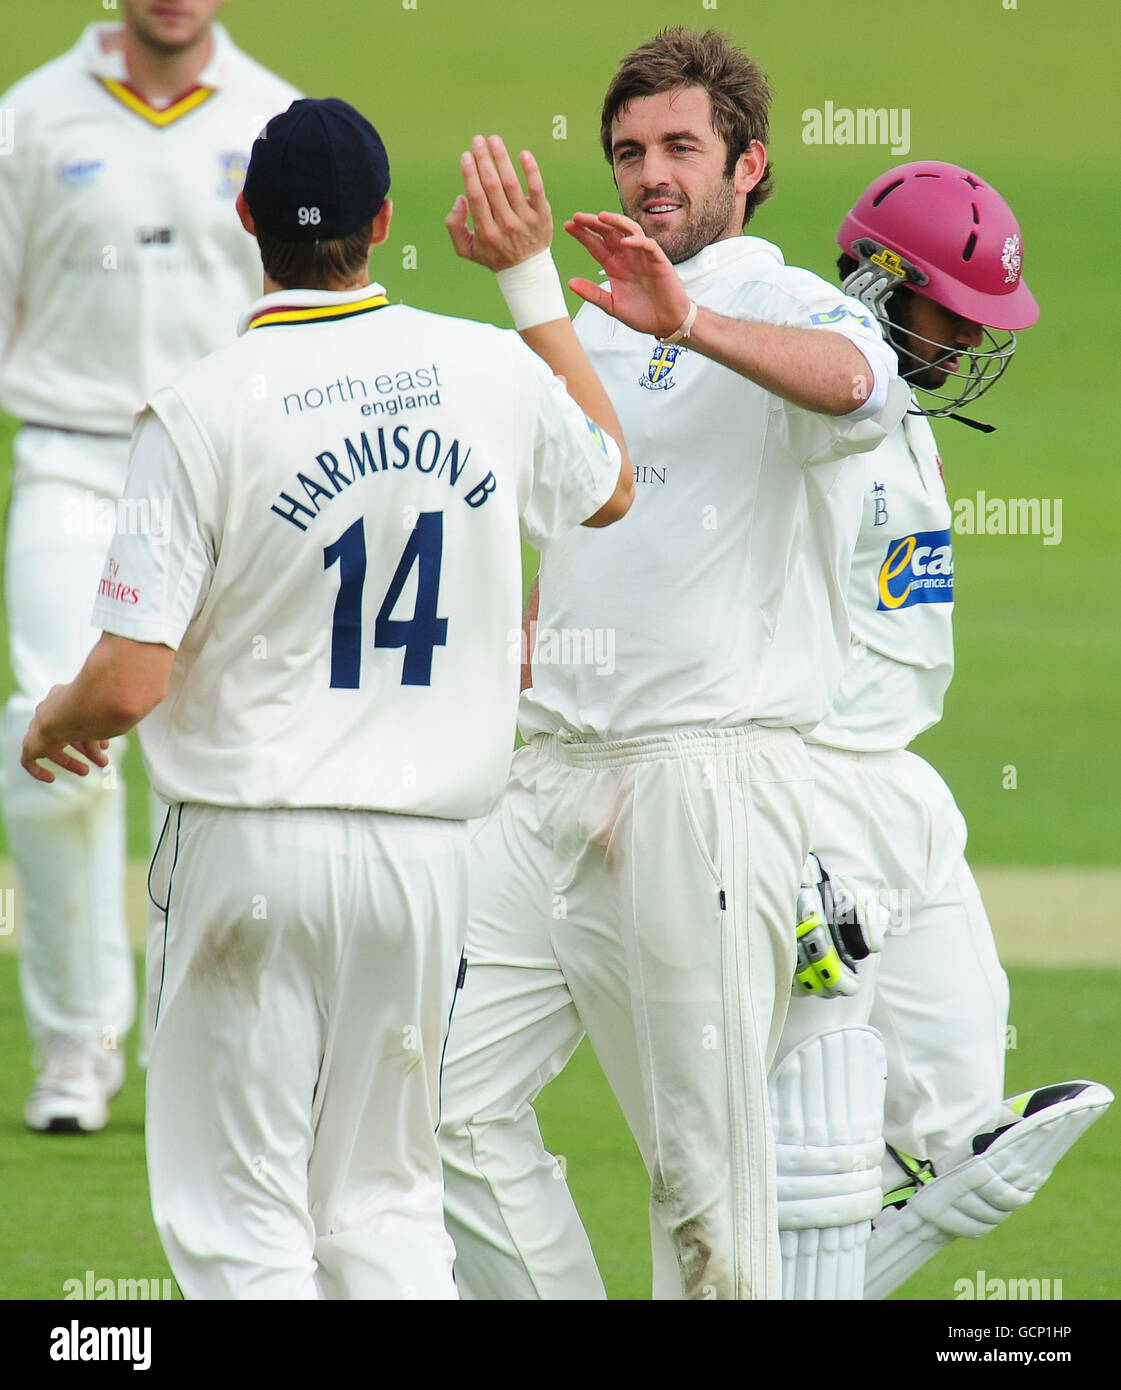 Durham's Liam Plunkett celebrates with Ben Harmison after taking the wicket of Somerset's Arul Suppiah during the LV County Championship match at the Emirates Durham International Cricket Ground, Durham. Stock Photo